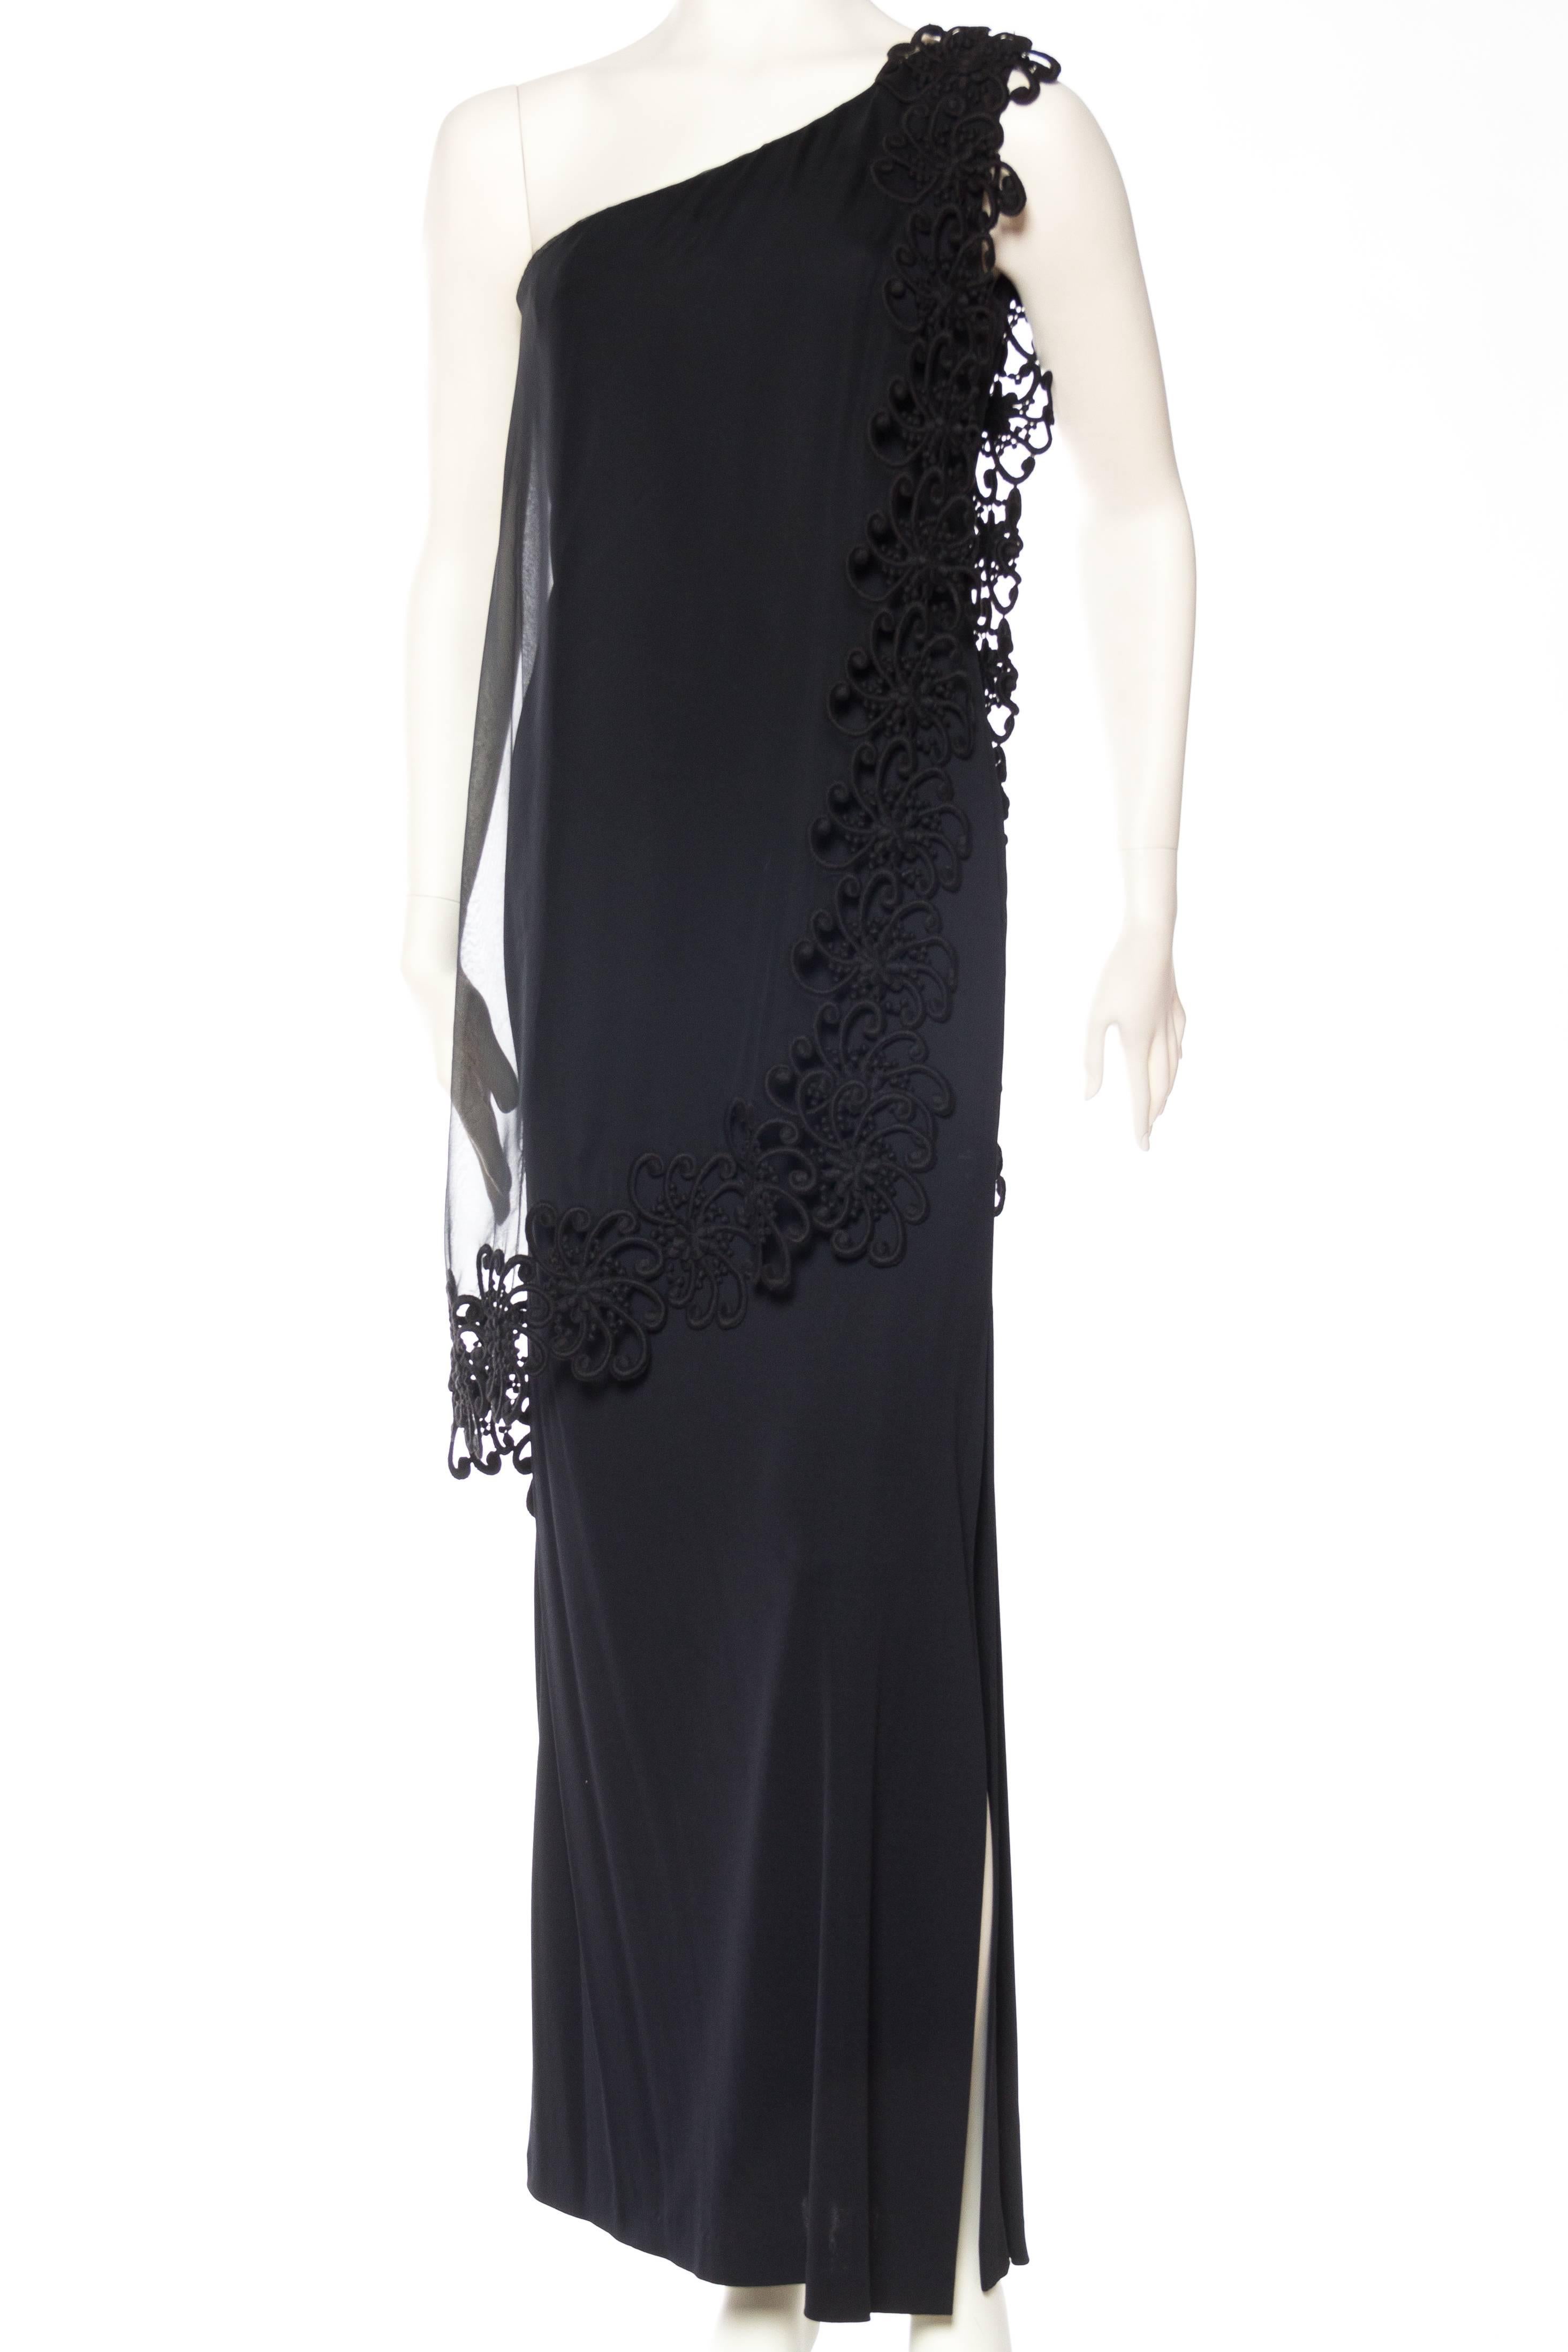 Black 1960s Mod Lace Trimmed Gown with Sheer Chiffon Overlay